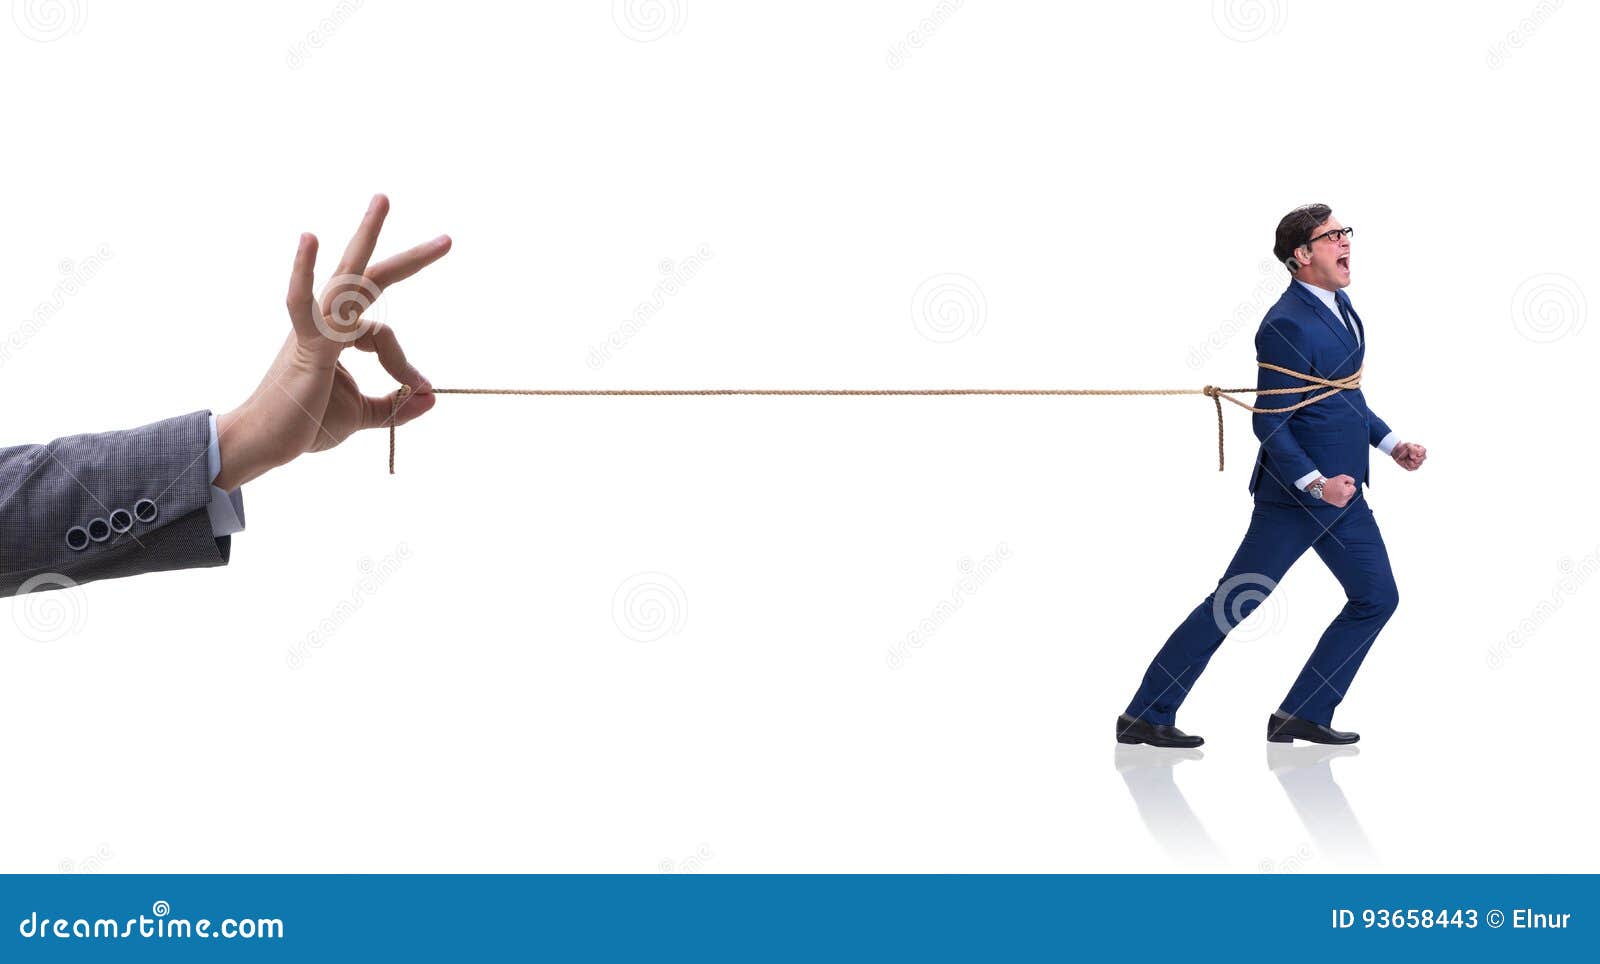 the staff retention concept with employee tied up